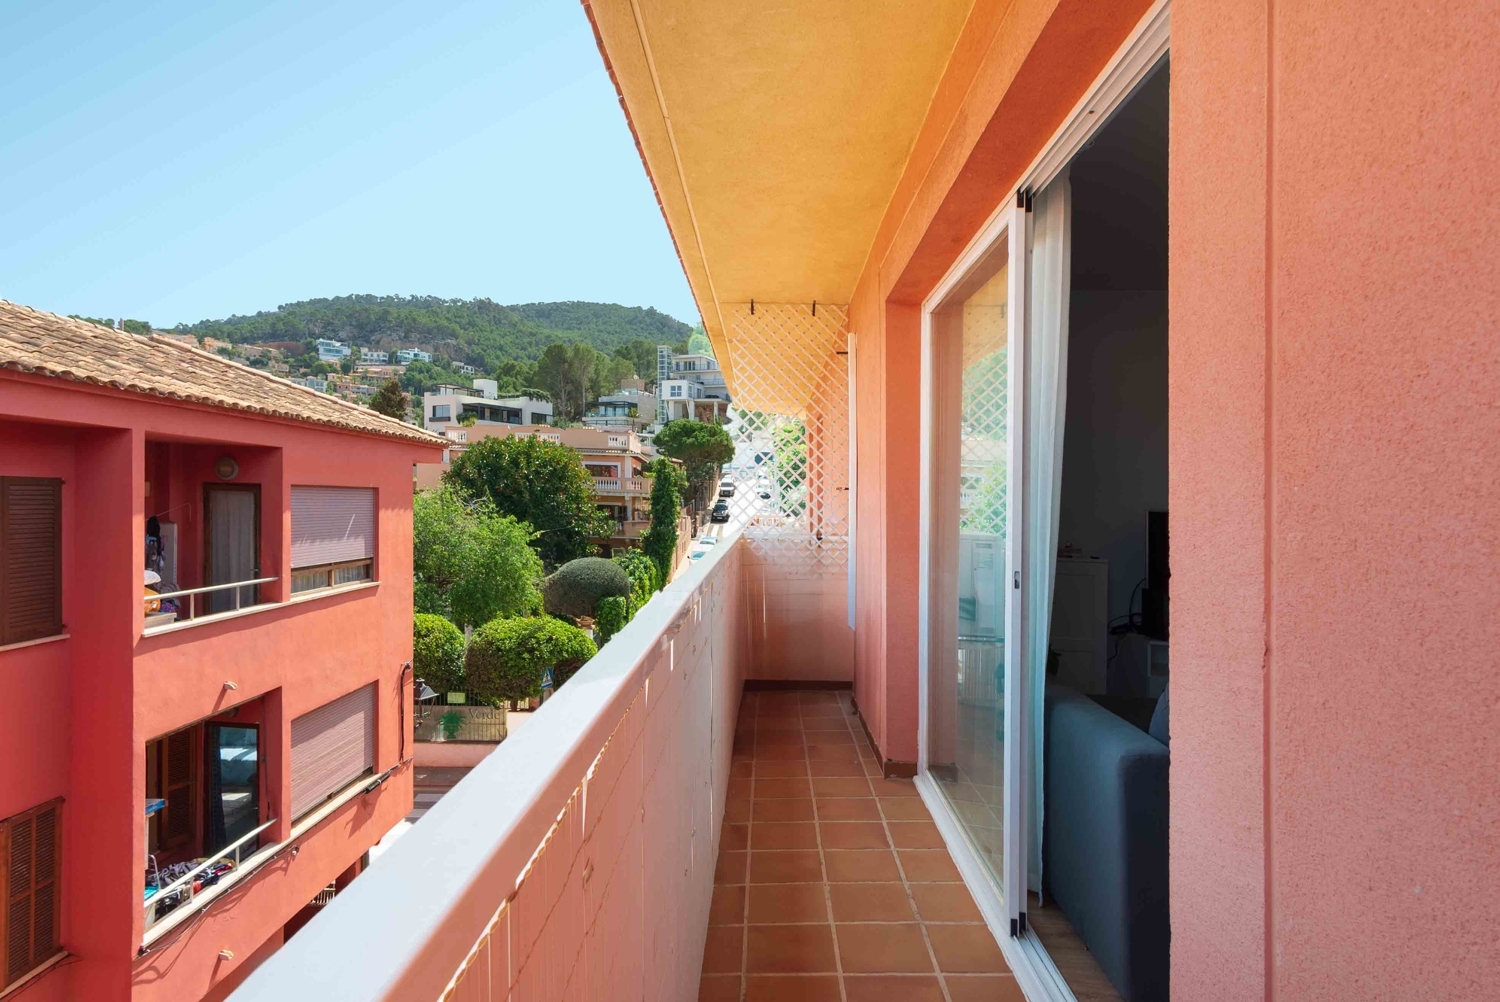 Charming renovated 2 bedroom flat with balcony, partial sea views and parking in Port Andratx